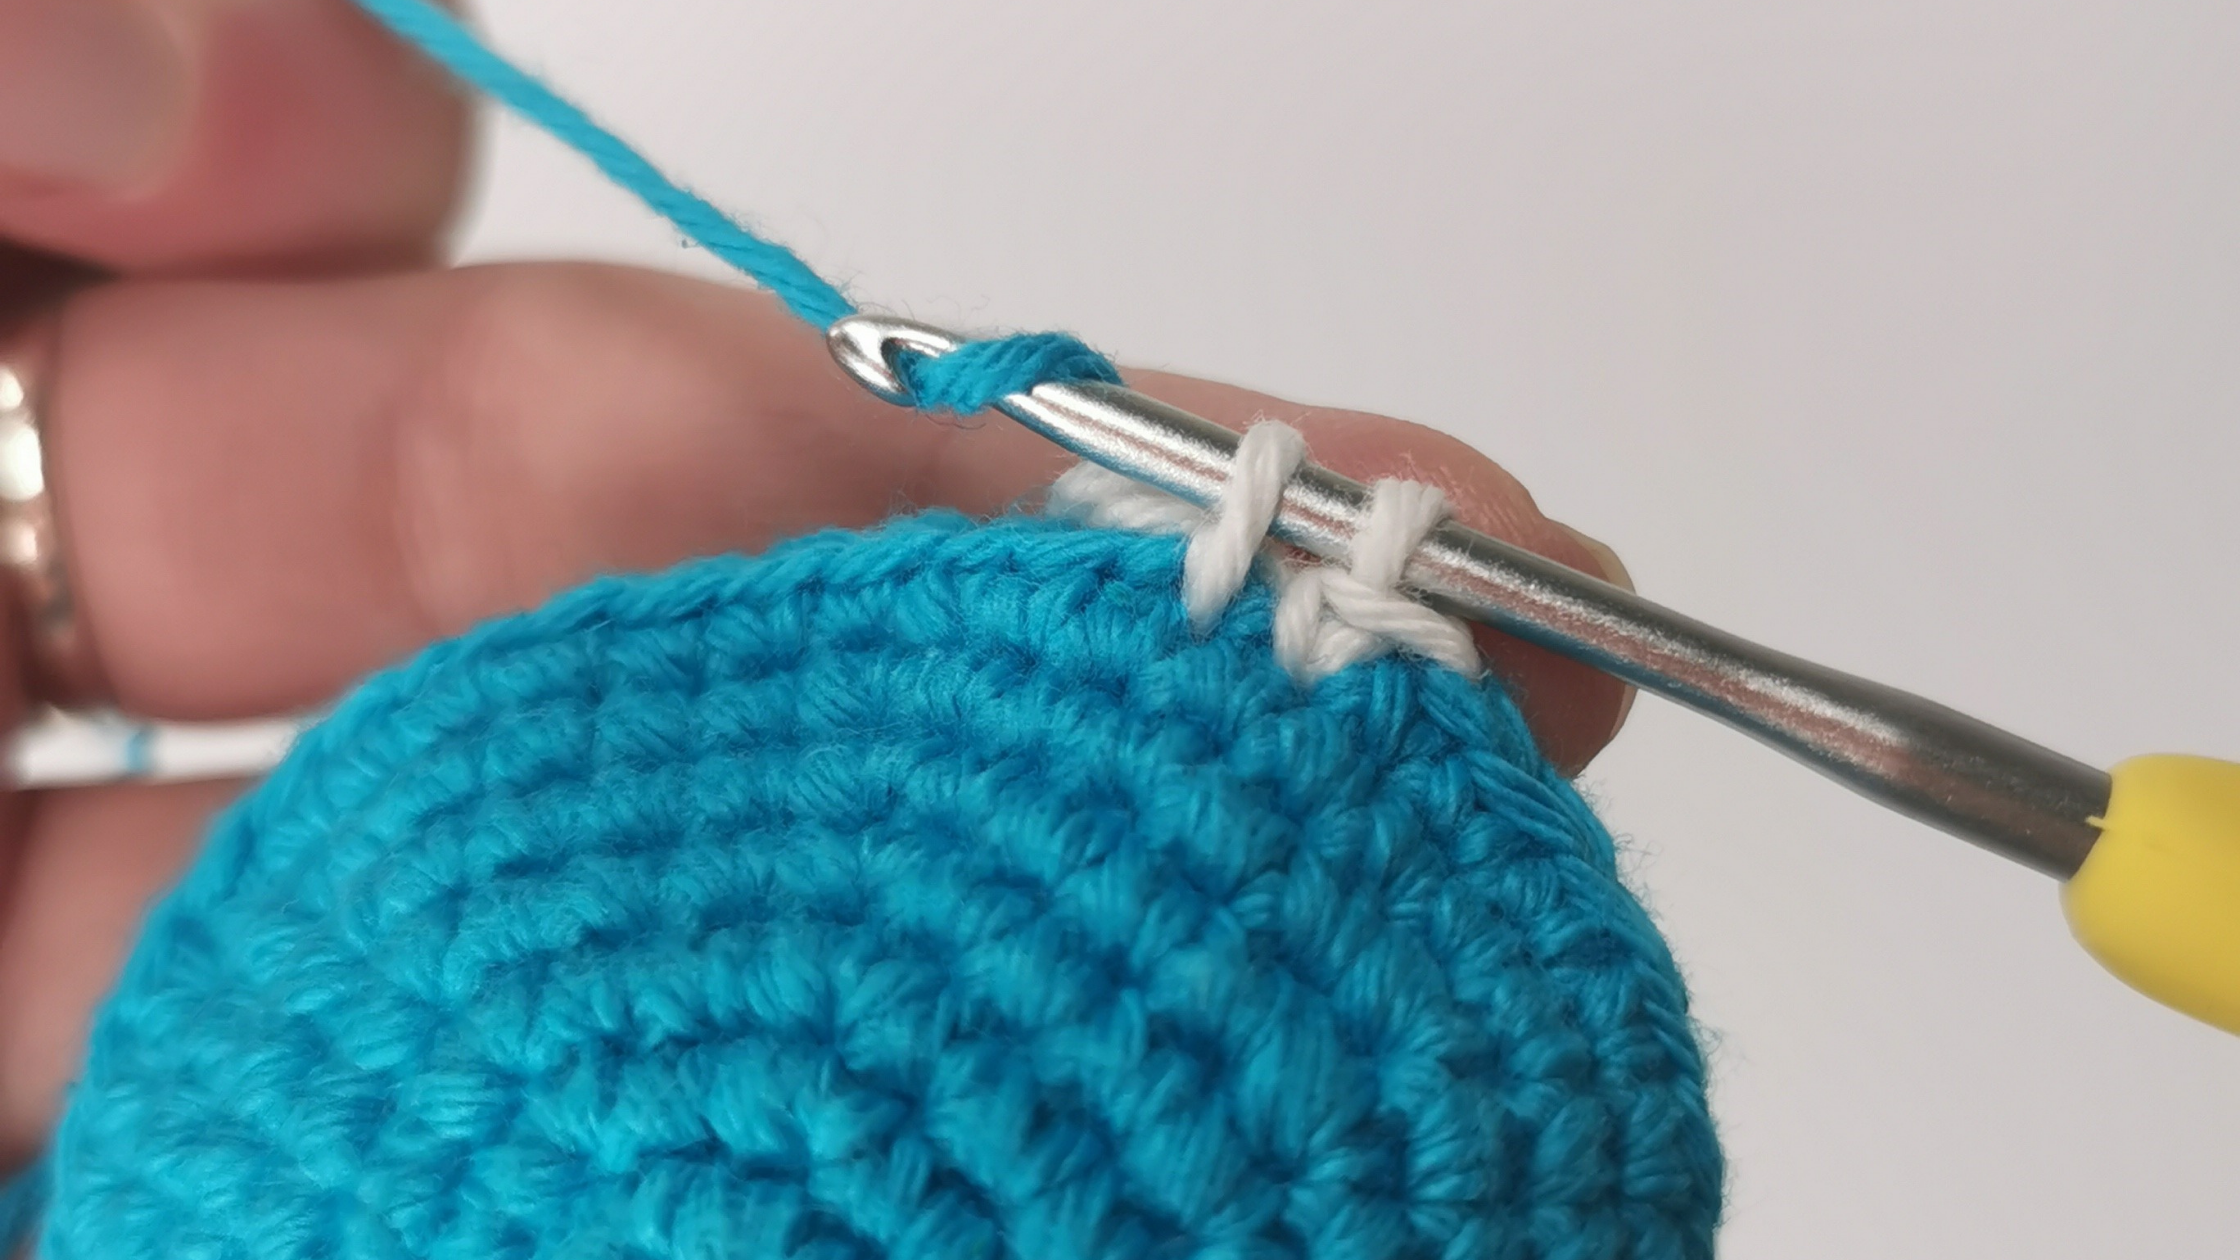 How to add stuffing to amigurumi. 3 steps and many tips